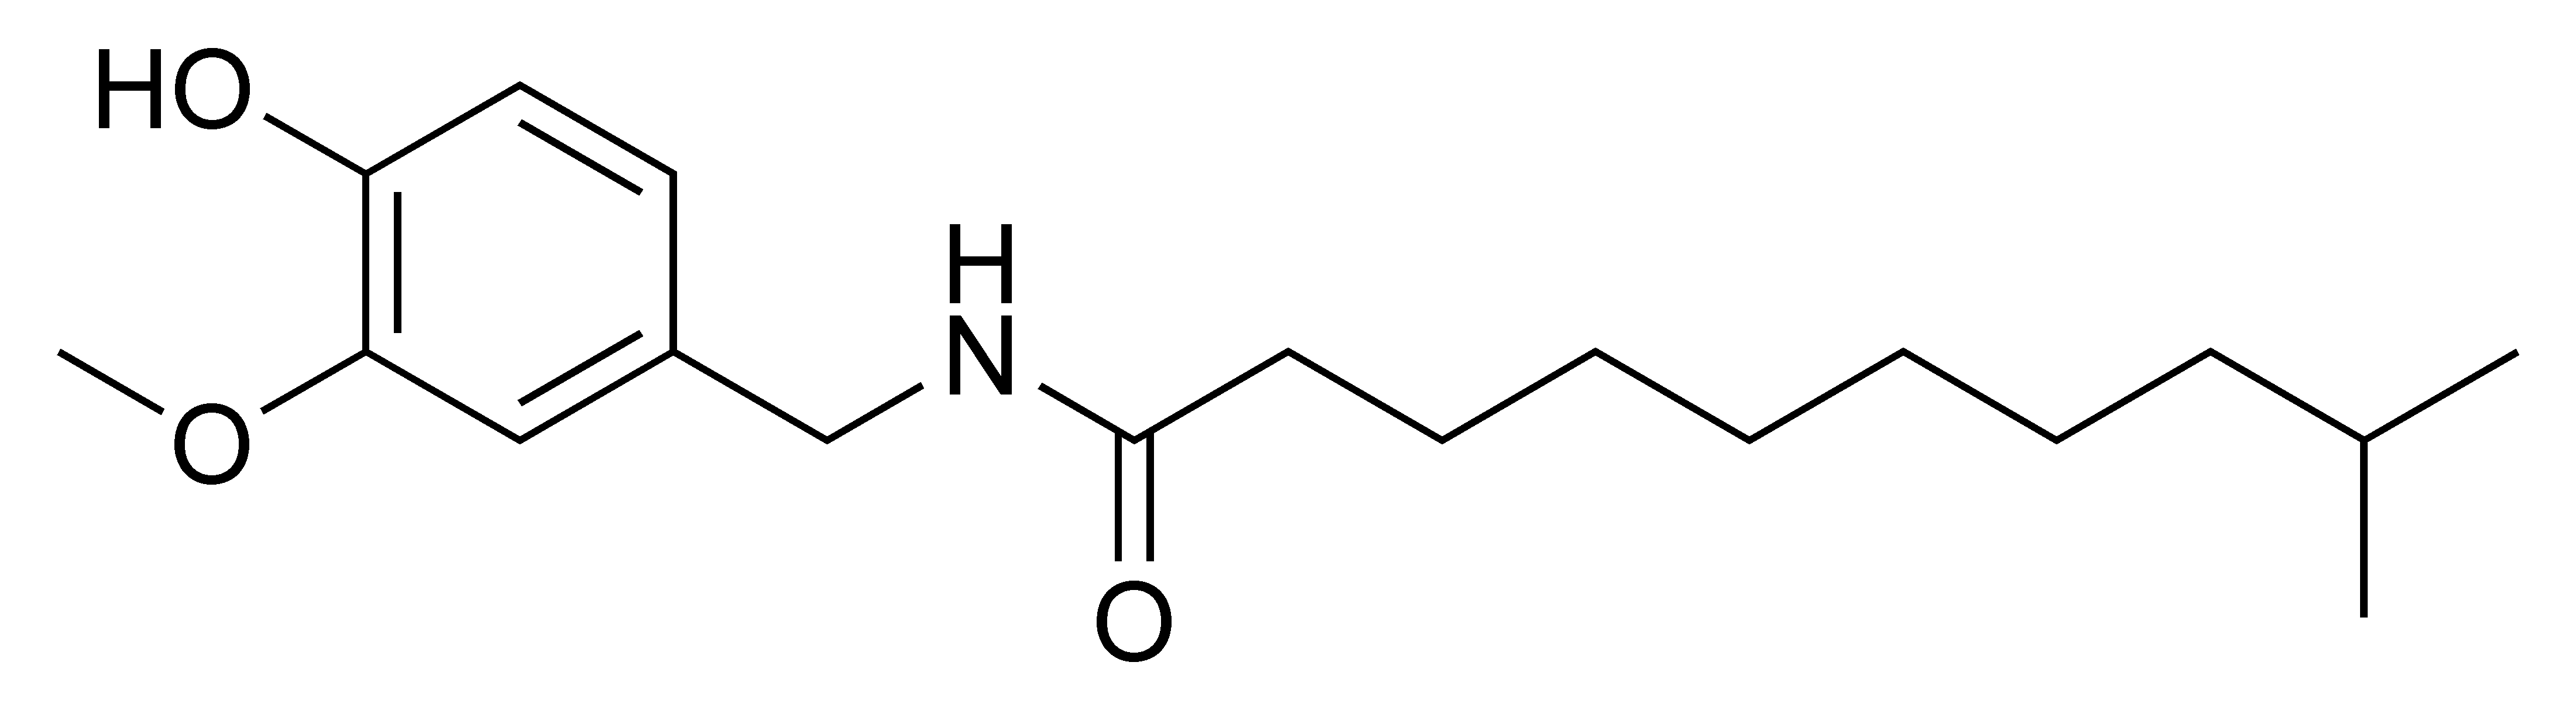 homodihydrocapsaicin_chemical_structure.png